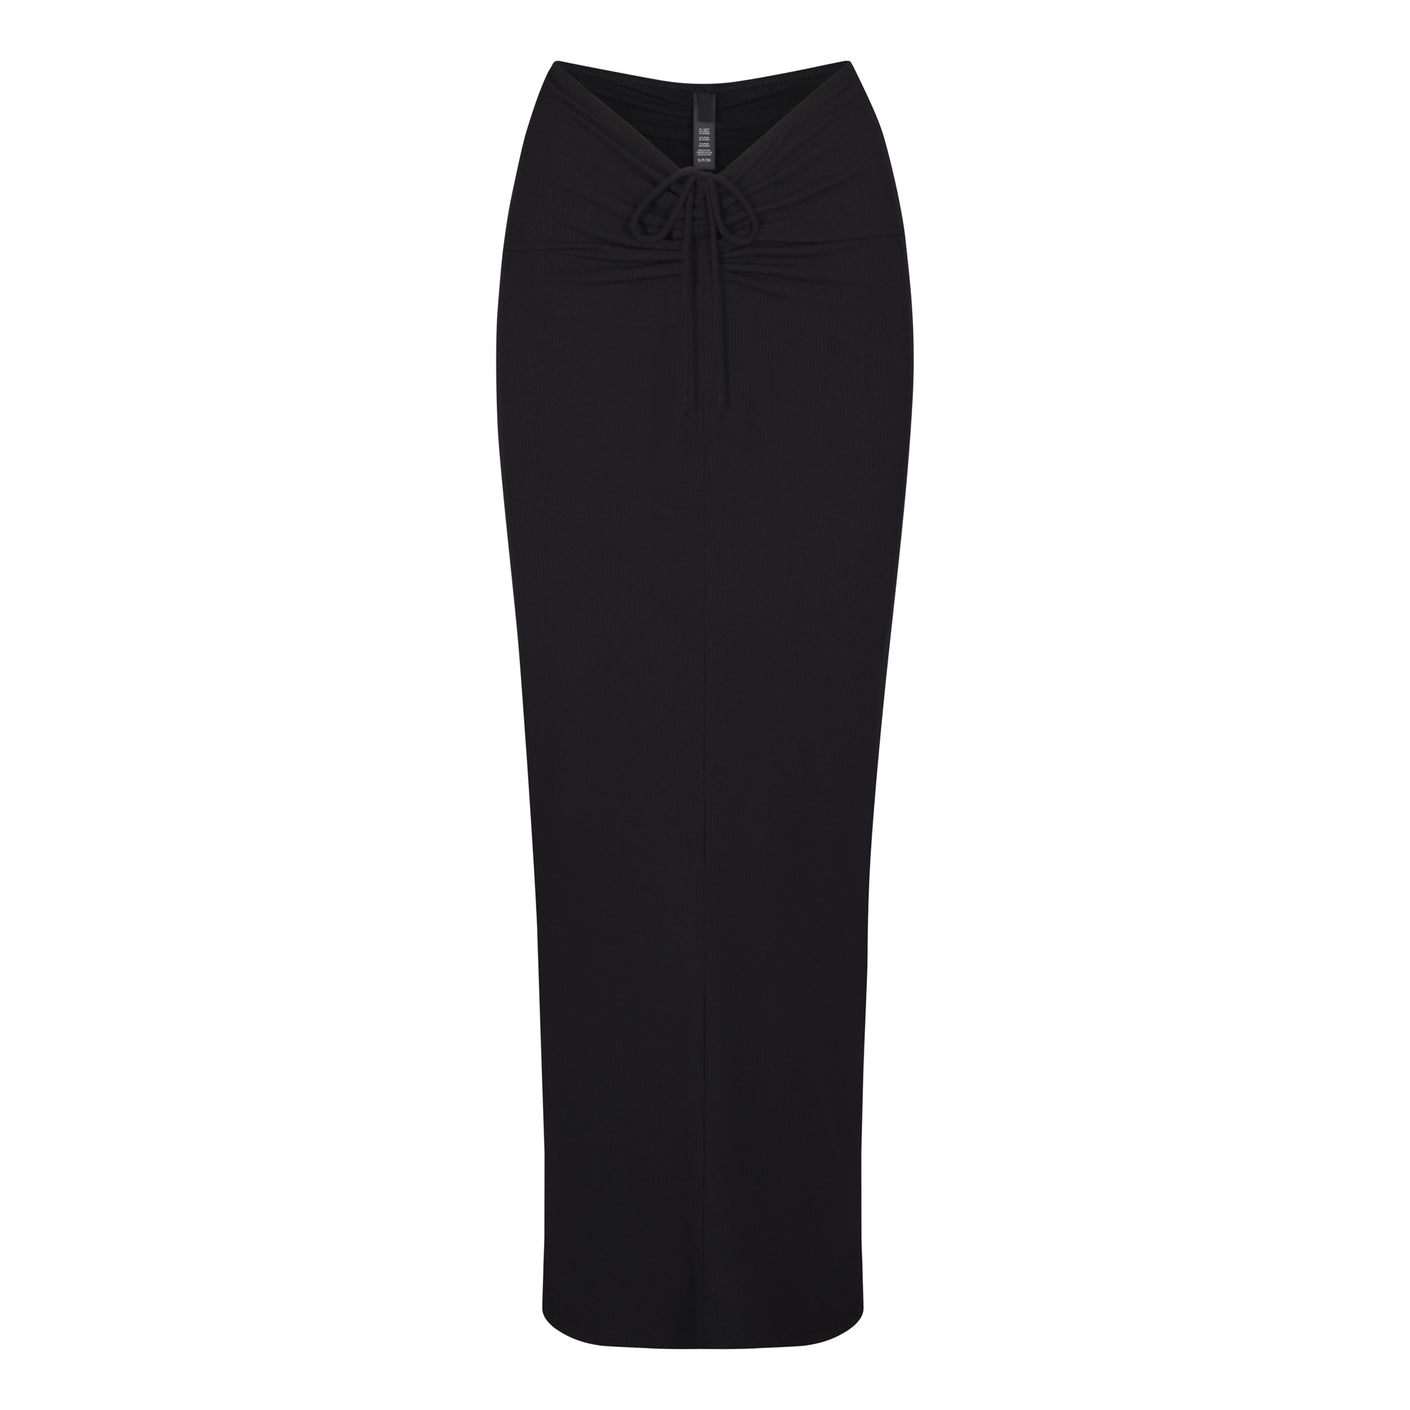 SOFT LOUNGE RUCHED LONG SKIRT